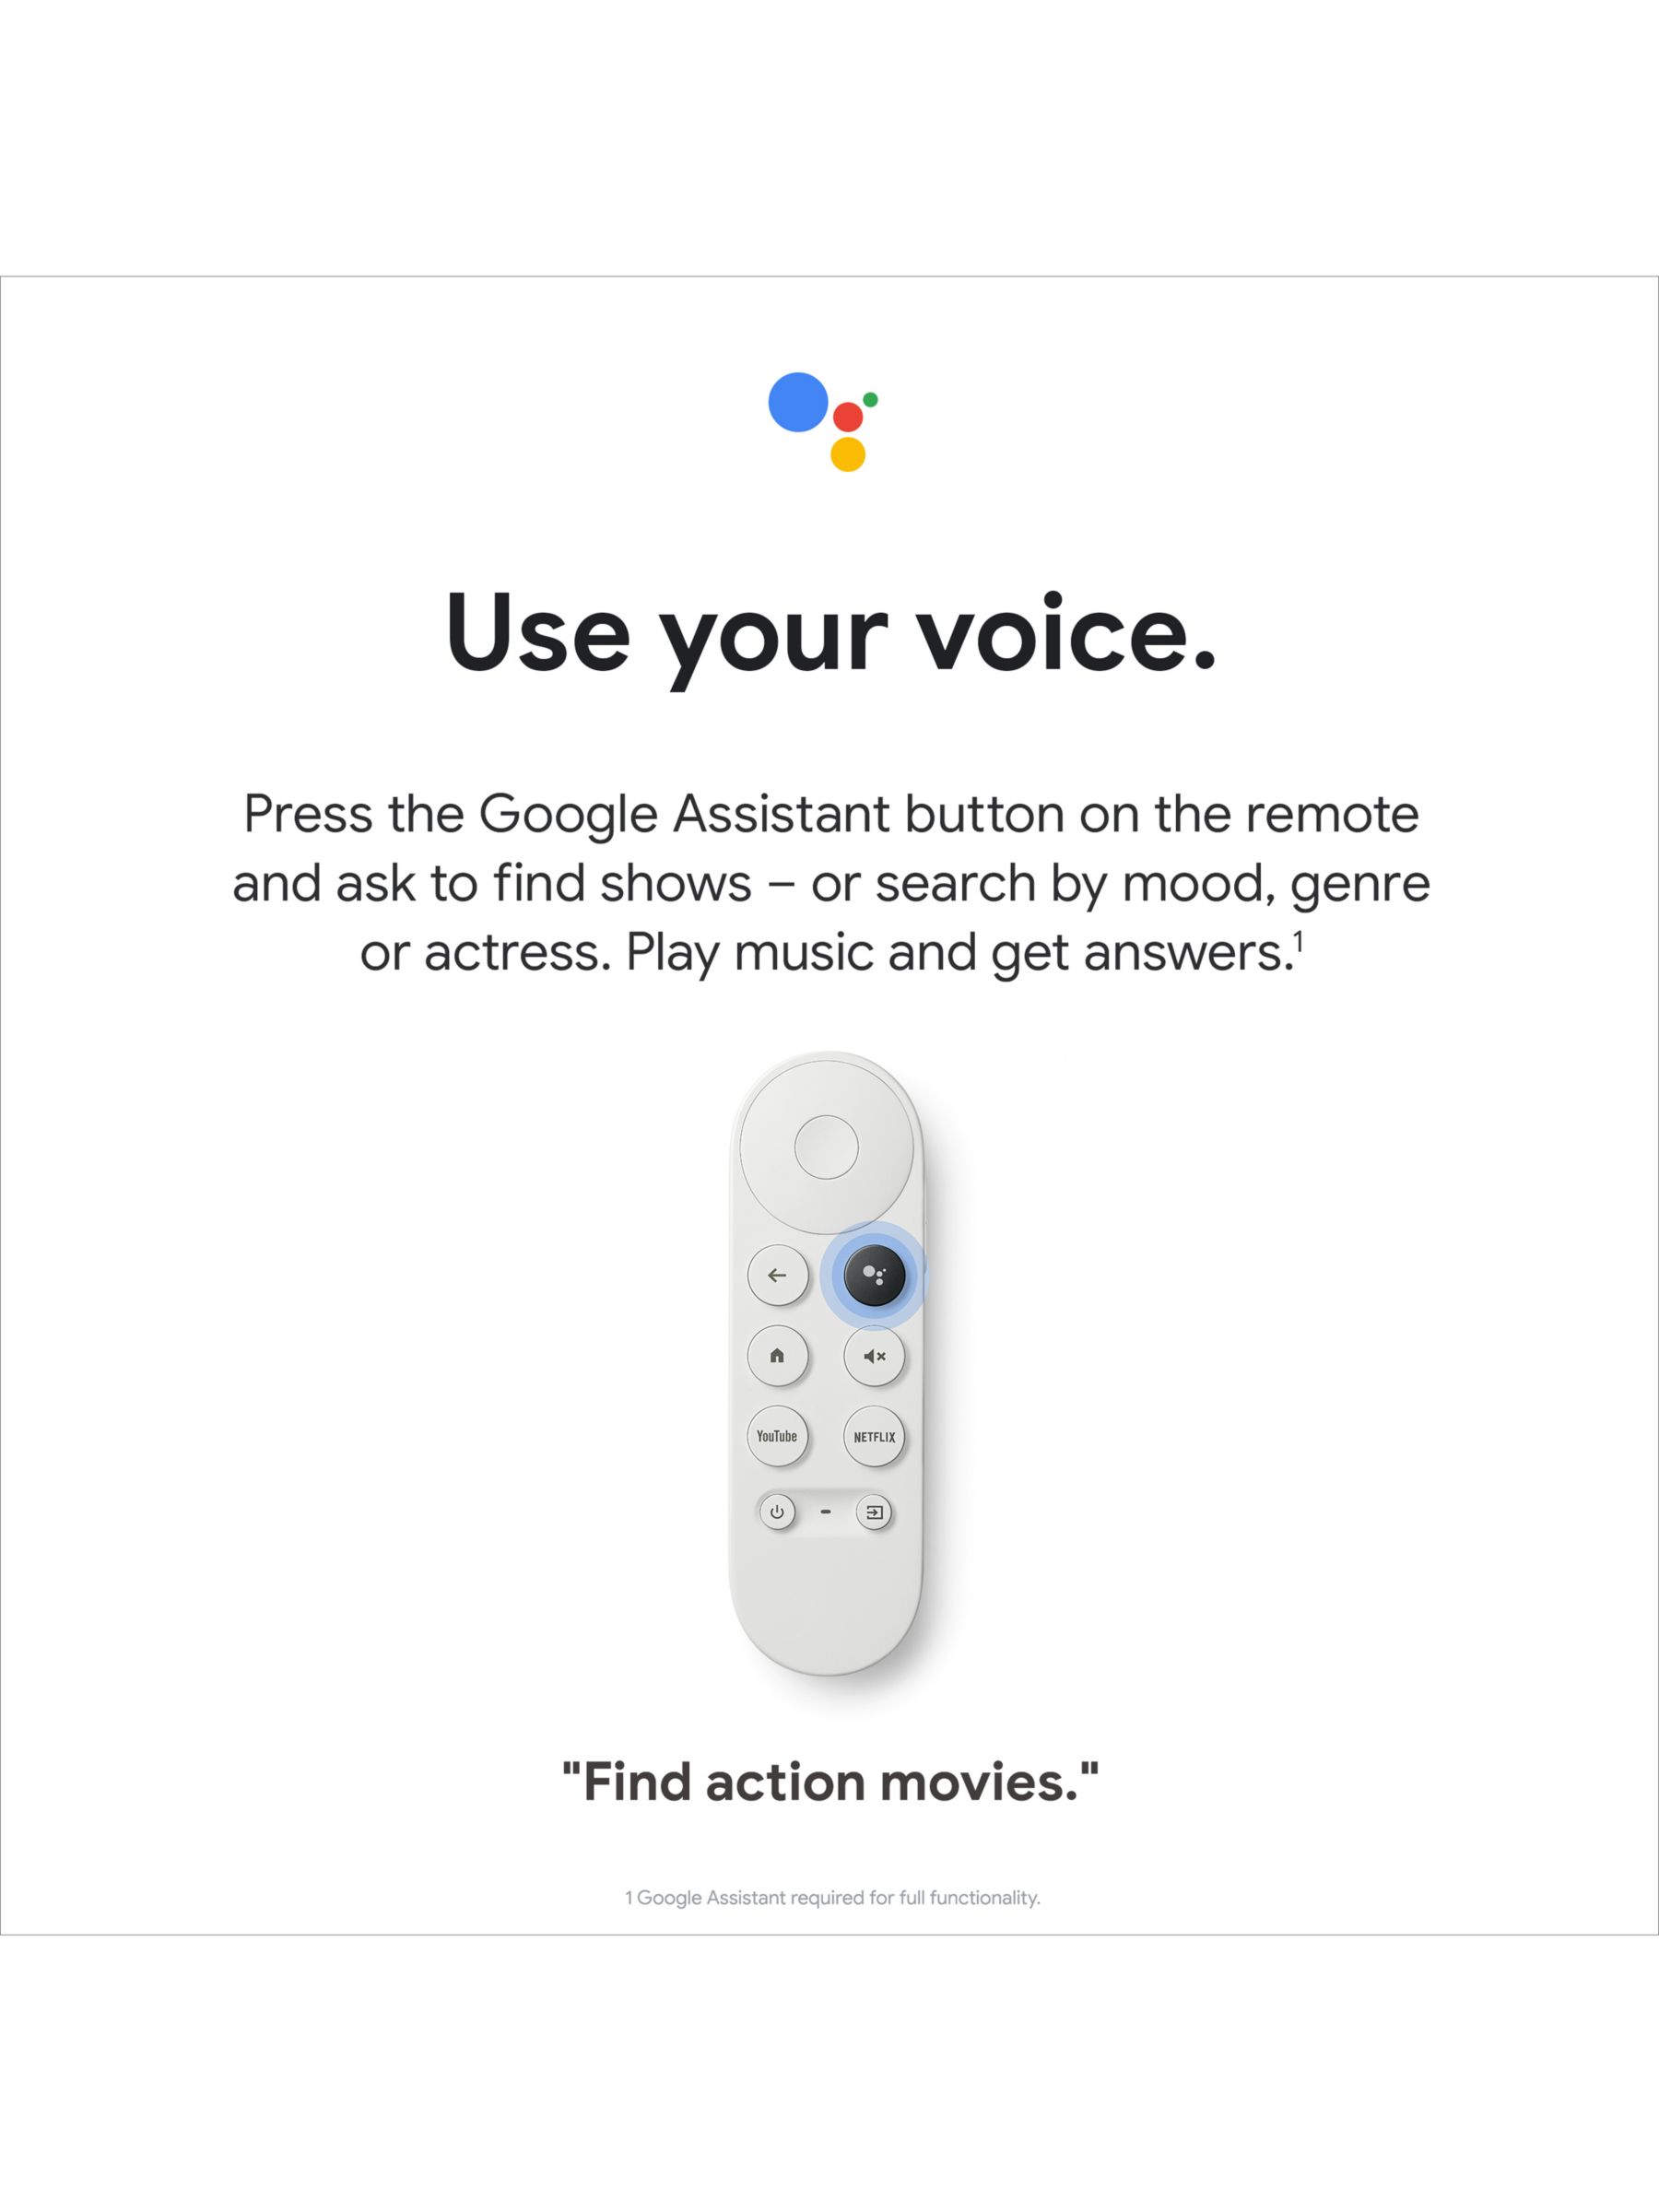 How to set up the Chromecast with Google TV and the voice remote